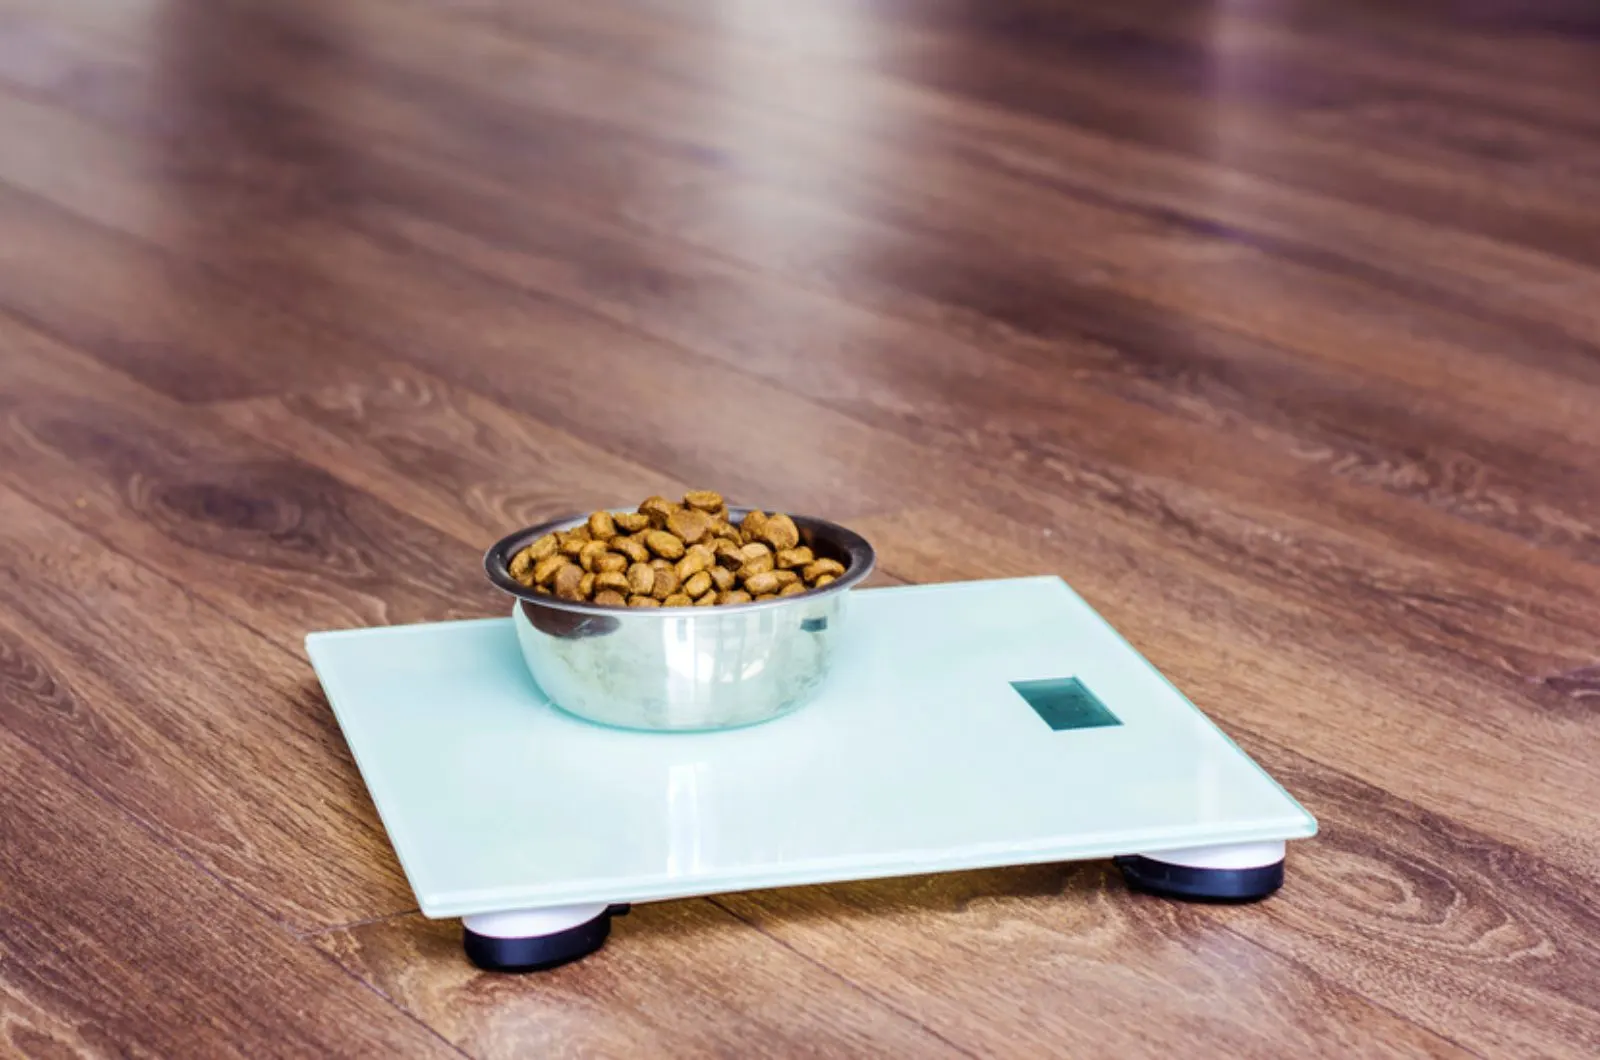 dry dog food on the scale